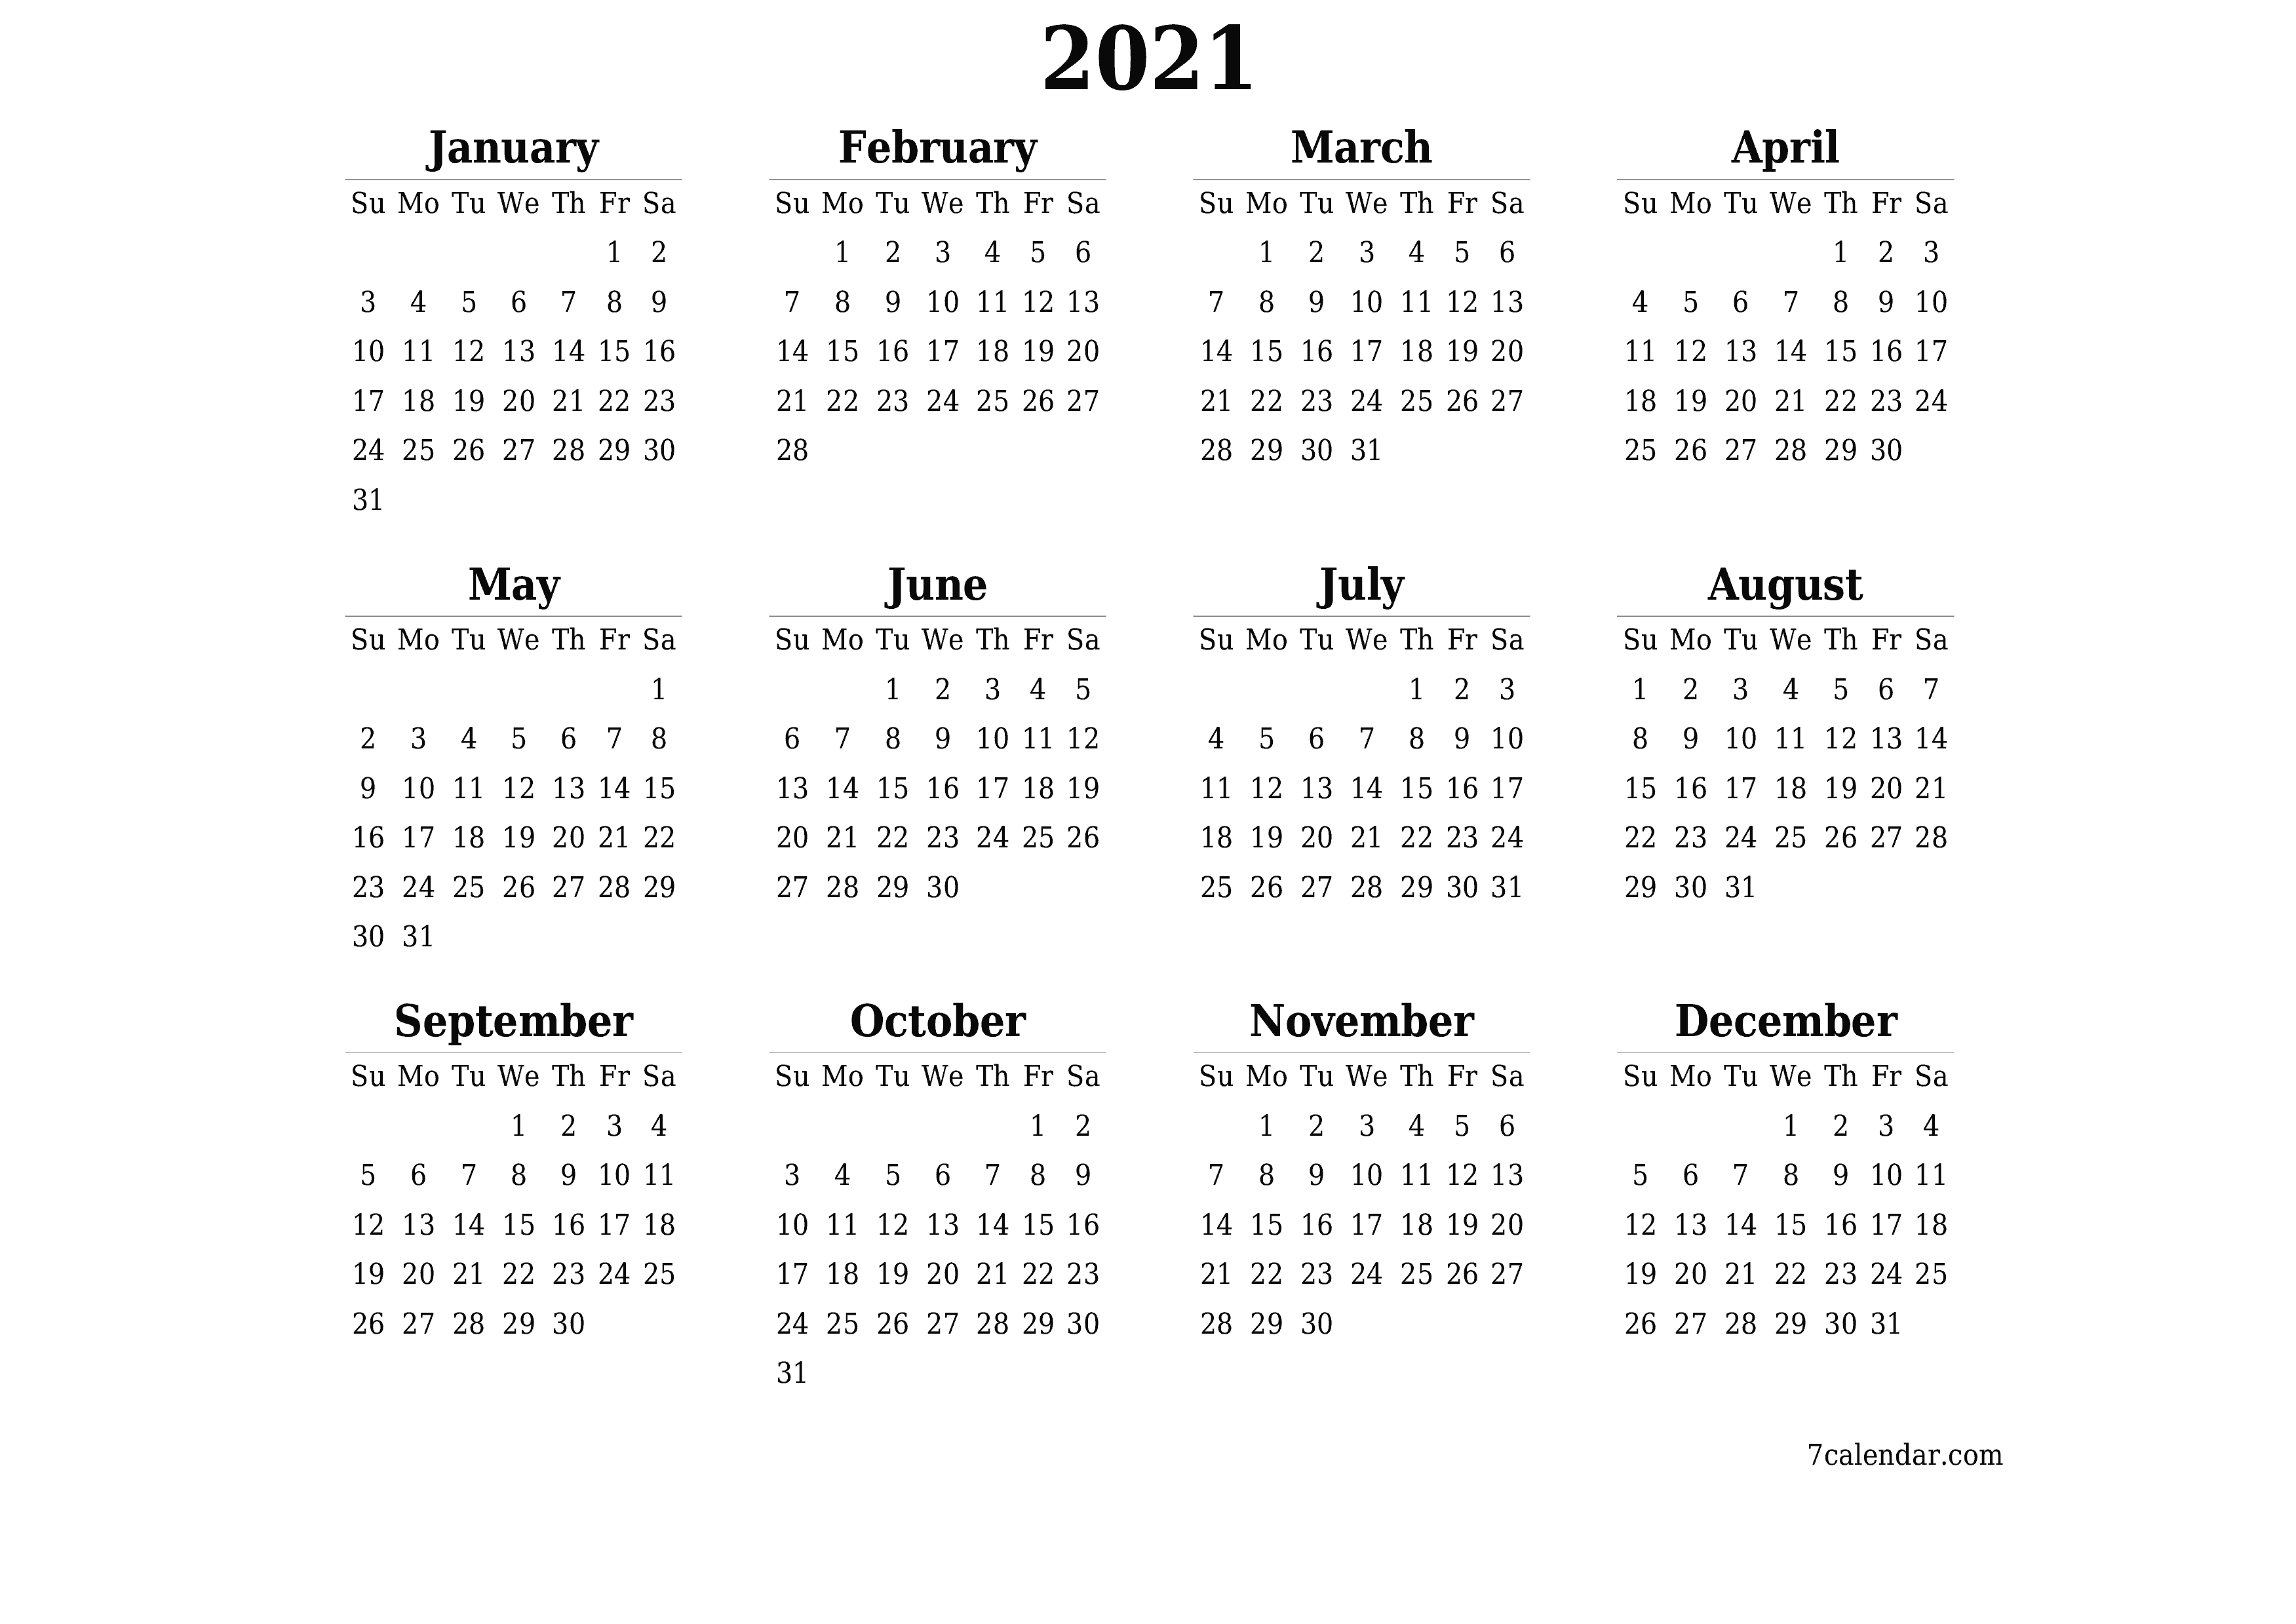 Blank yearly printable calendar and planner for the year 2021 with notes, save and print to PDF PNG English - 7calendar.com